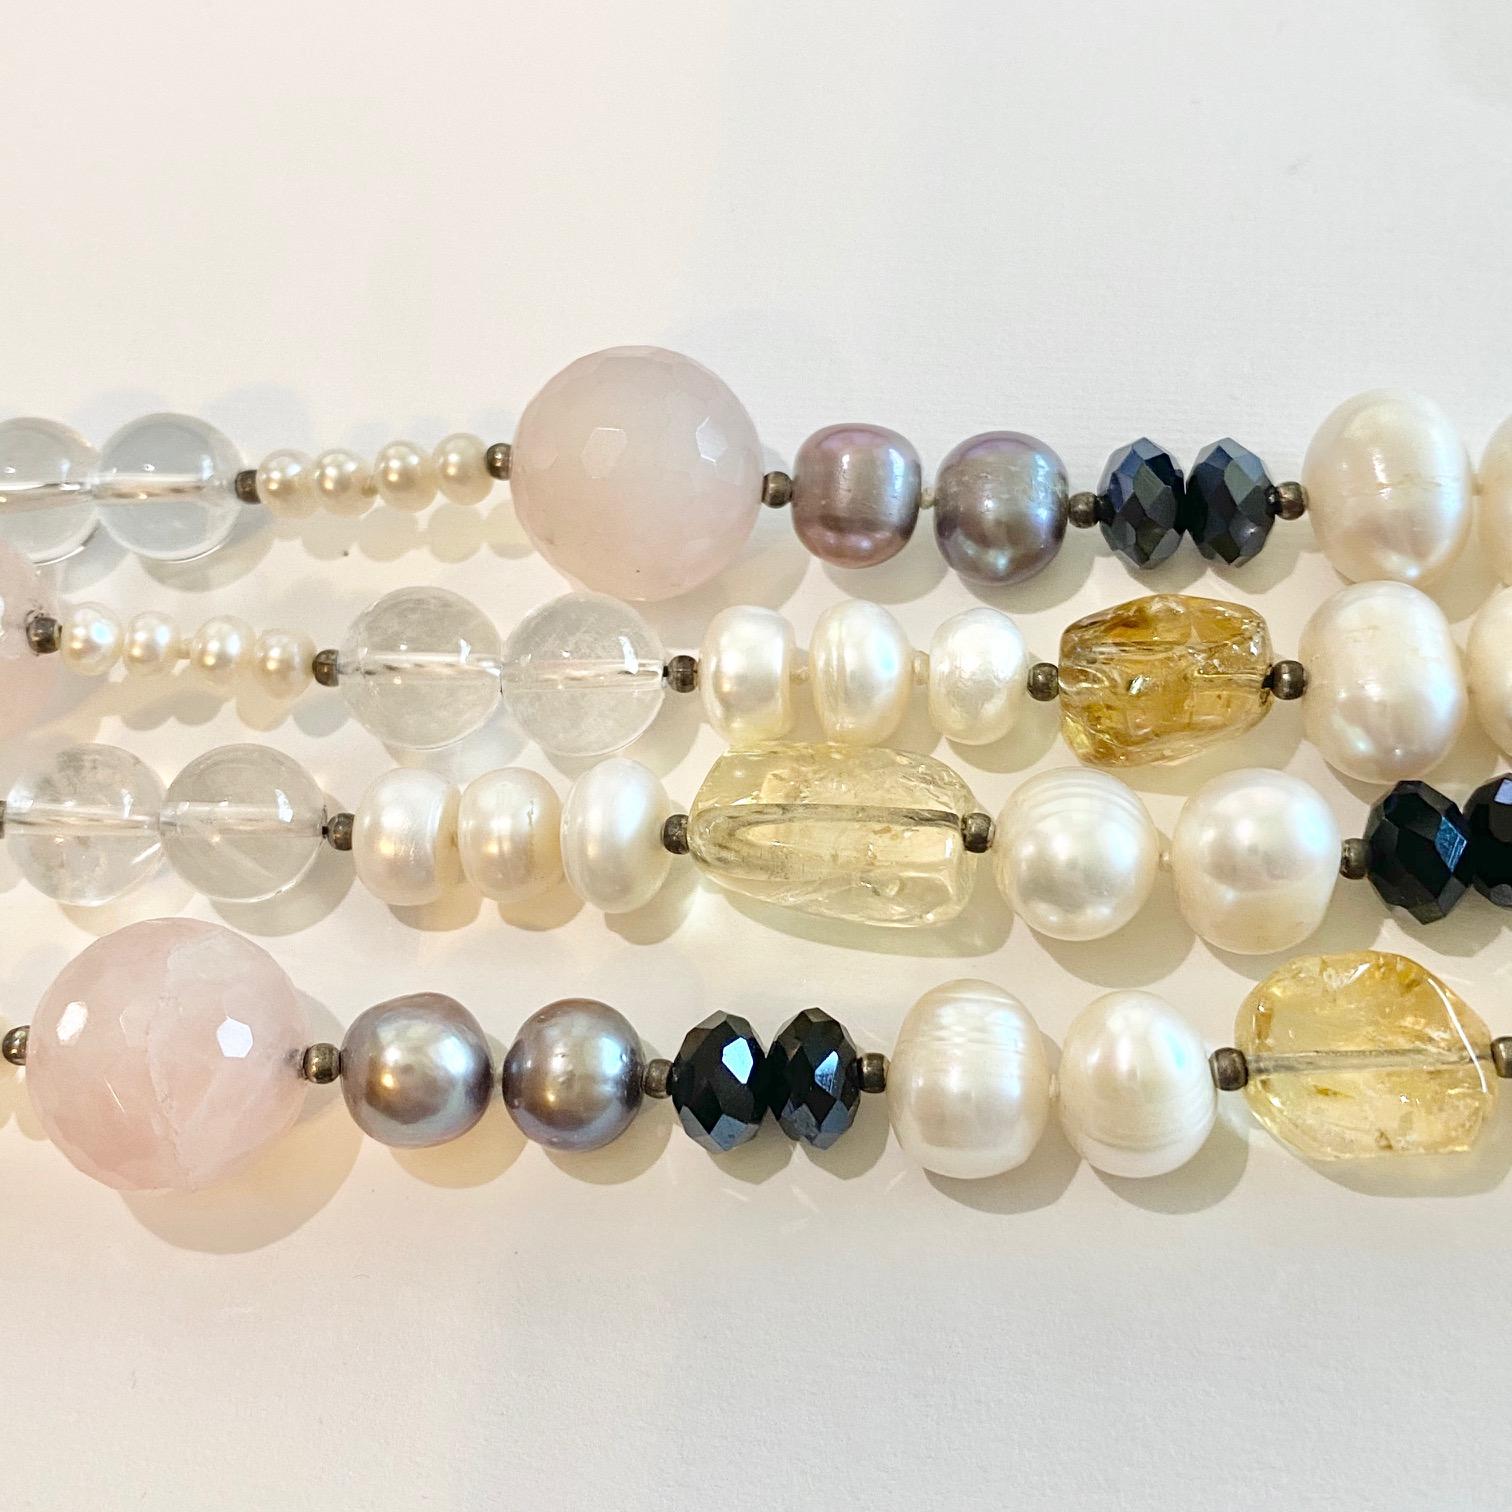 This genuine pearl and rose quartz necklace is absolutely one of a kind and gorgeous! It is made with all natural cultured pearls, rose quartz, rock crystal quartz, citrine, and black zircon and small sterling silver beads. All of the stones are